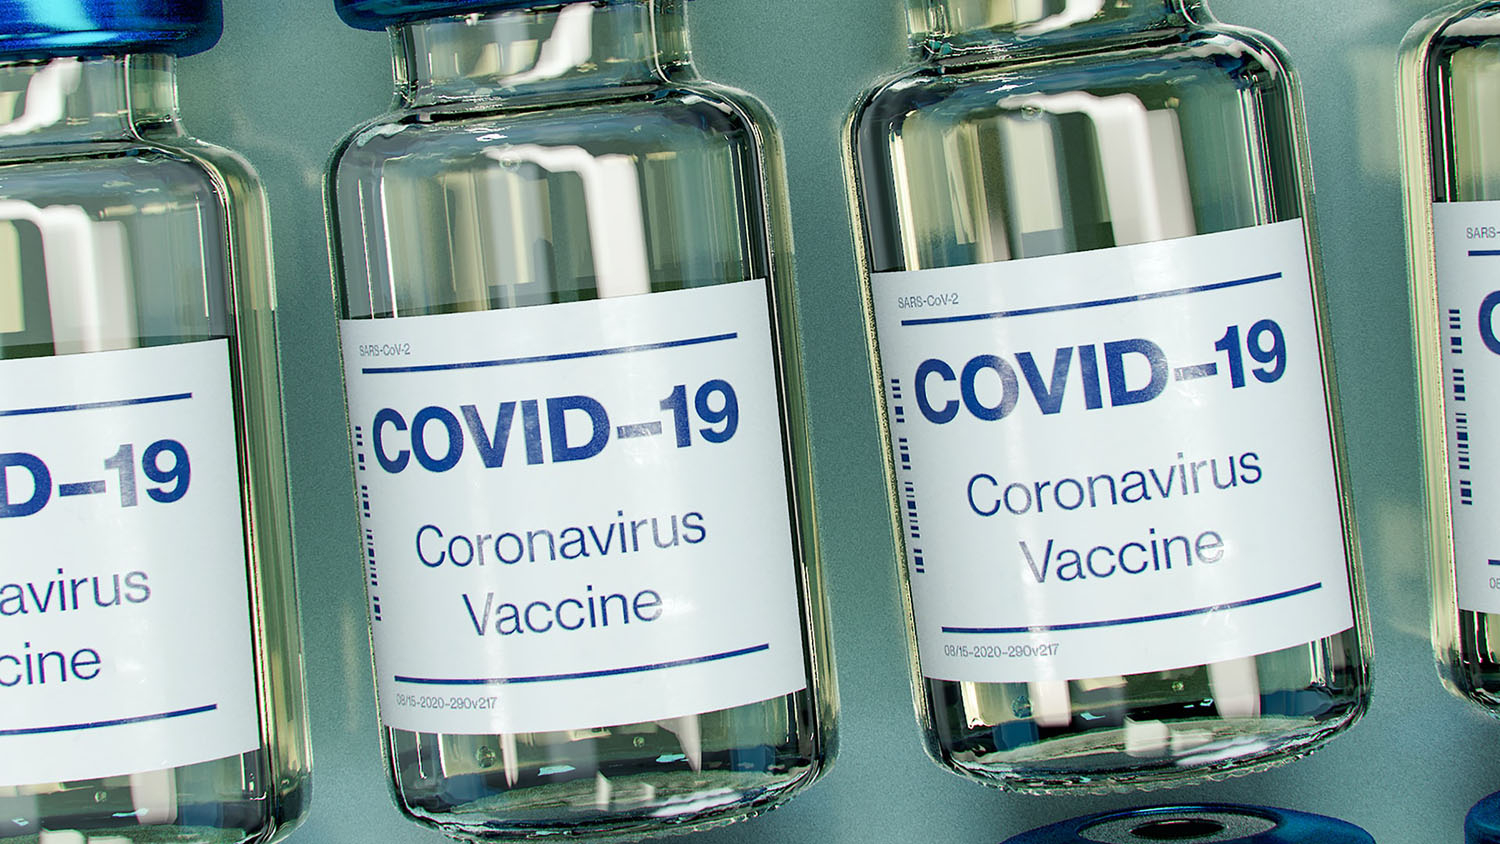 rows of vials containing covid-19 vaccine